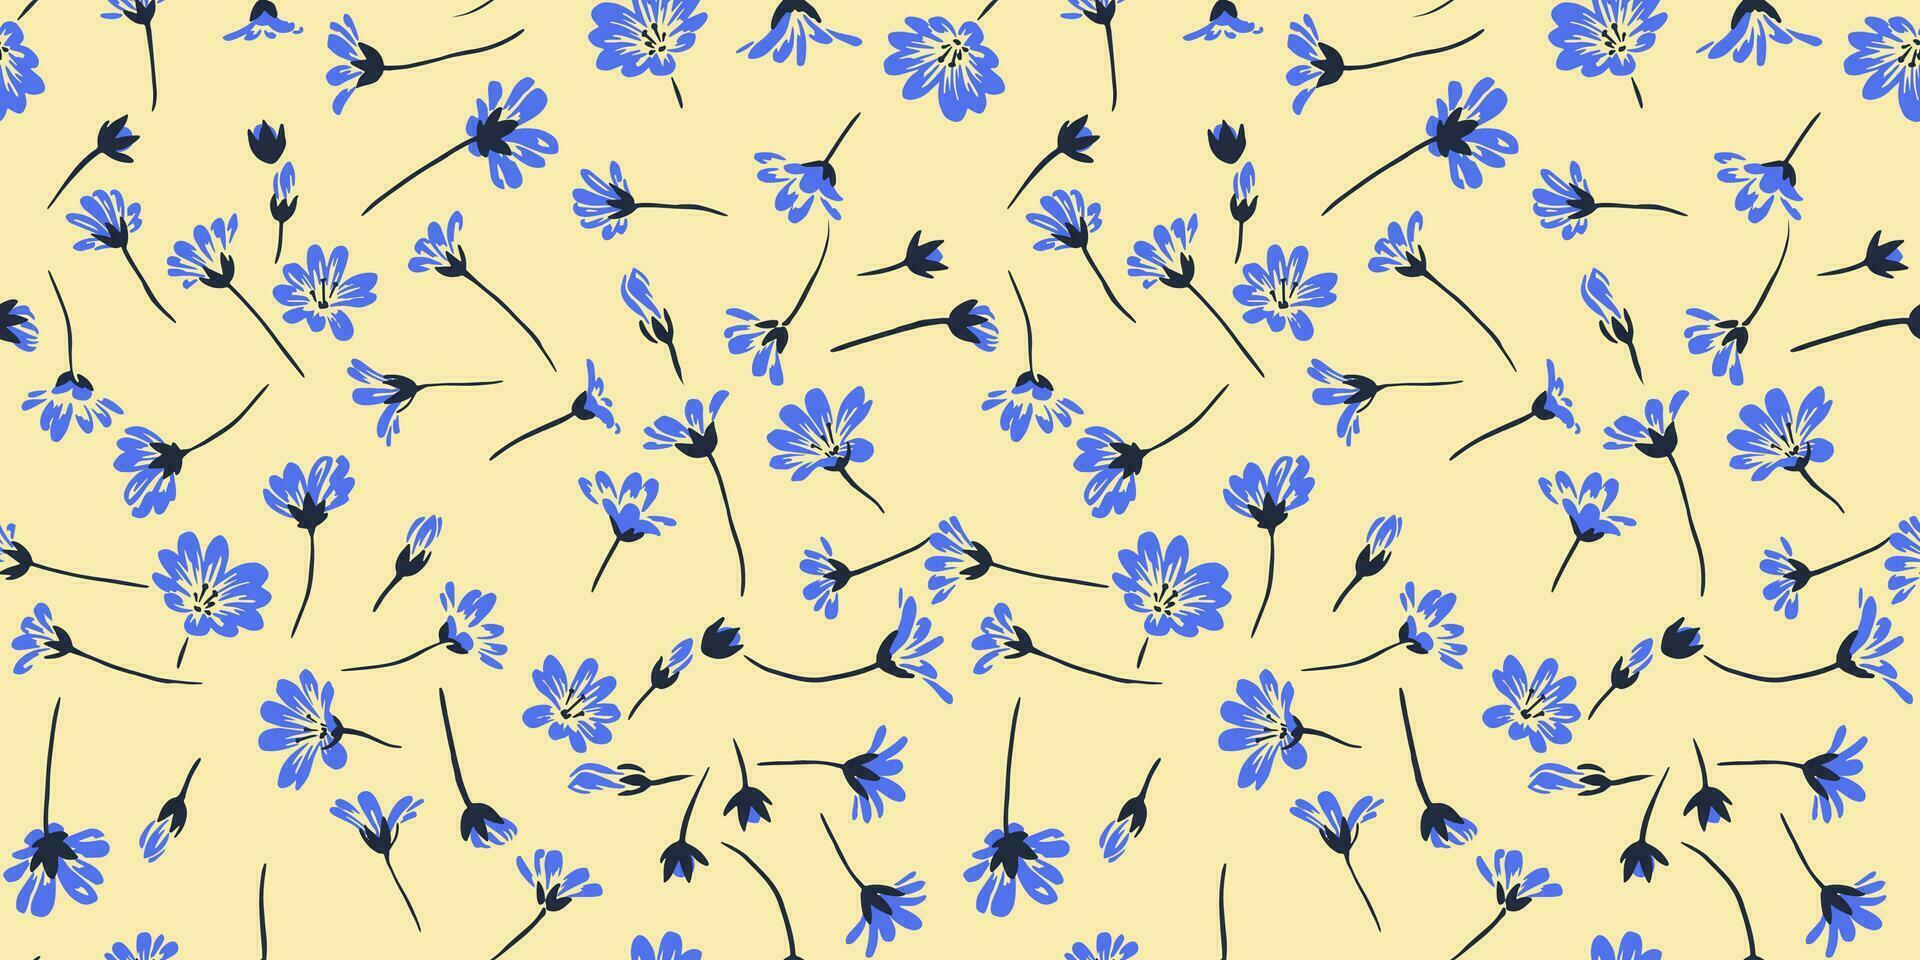 Art simple blue tiny floral pattern on a yellow background. Vector hand drawn sketch. Creative shape wild flowers printing. Design for fashion, fabric, and textile.